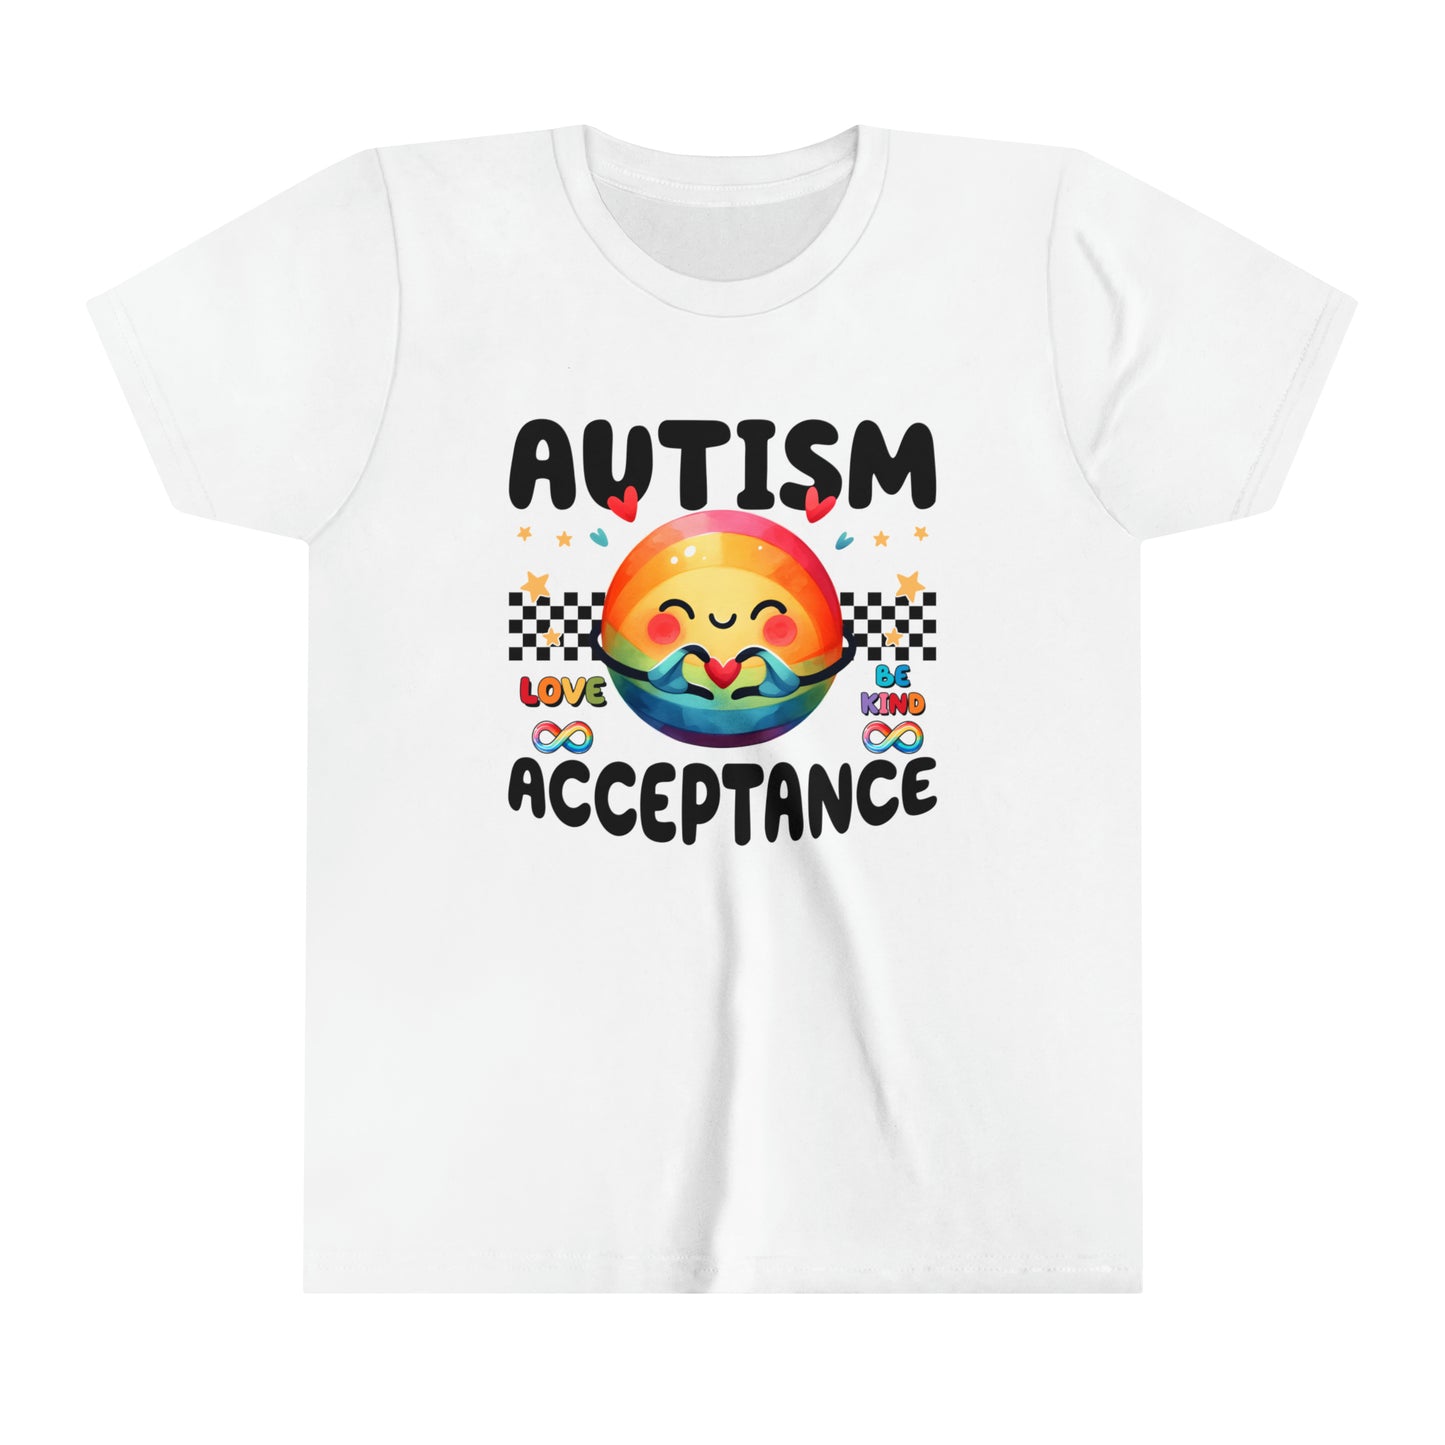 Autism Acceptance Advocate Youth Shirt